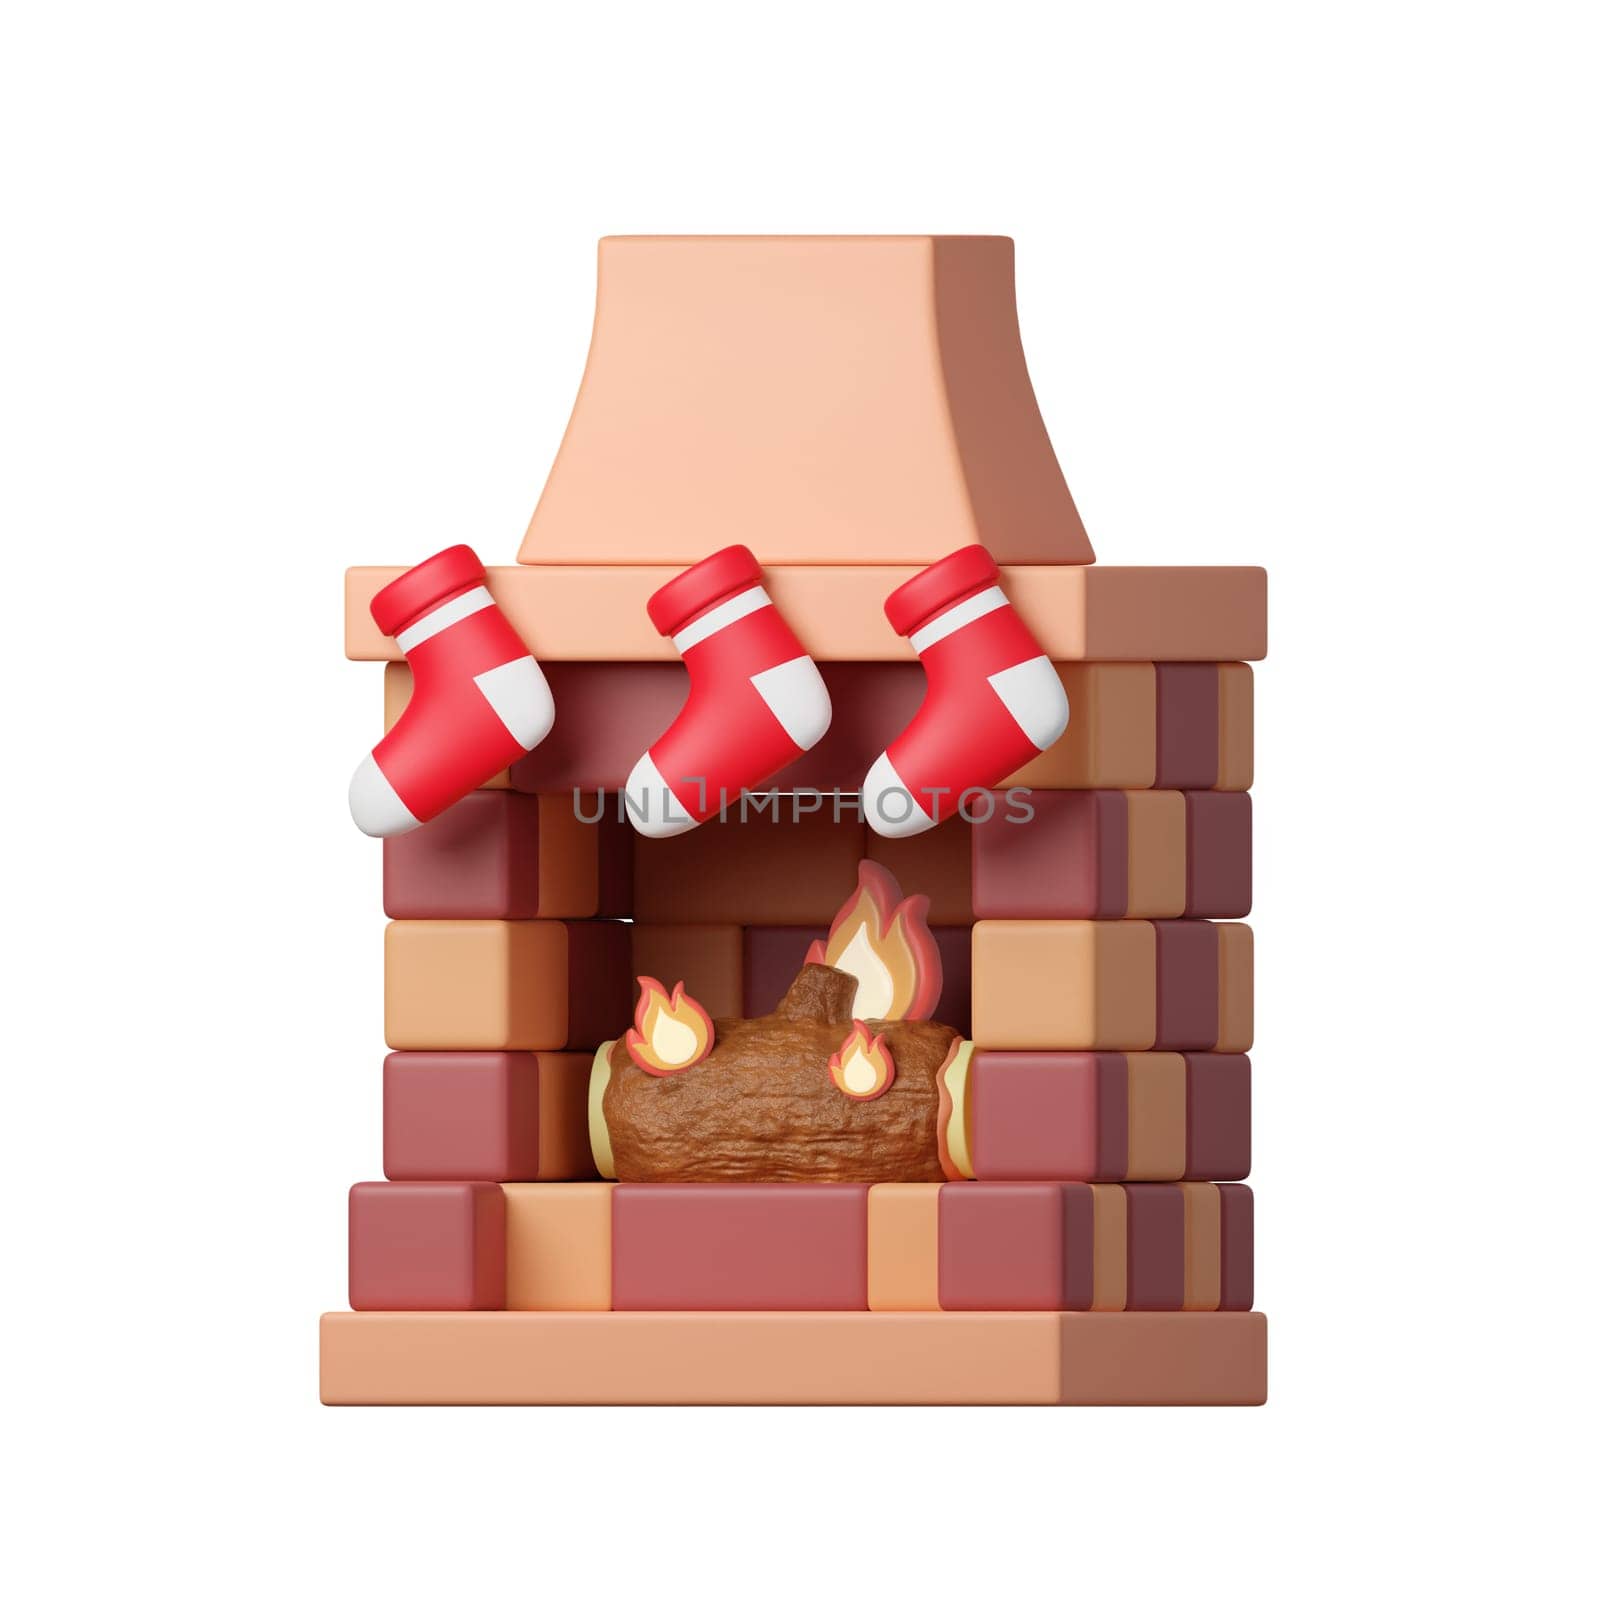 3d Christmas fireplace icon. minimal decorative festive conical shape tree. New Year's holiday decor. 3d design element In cartoon style. Icon isolated on white background. 3d illustration by meepiangraphic